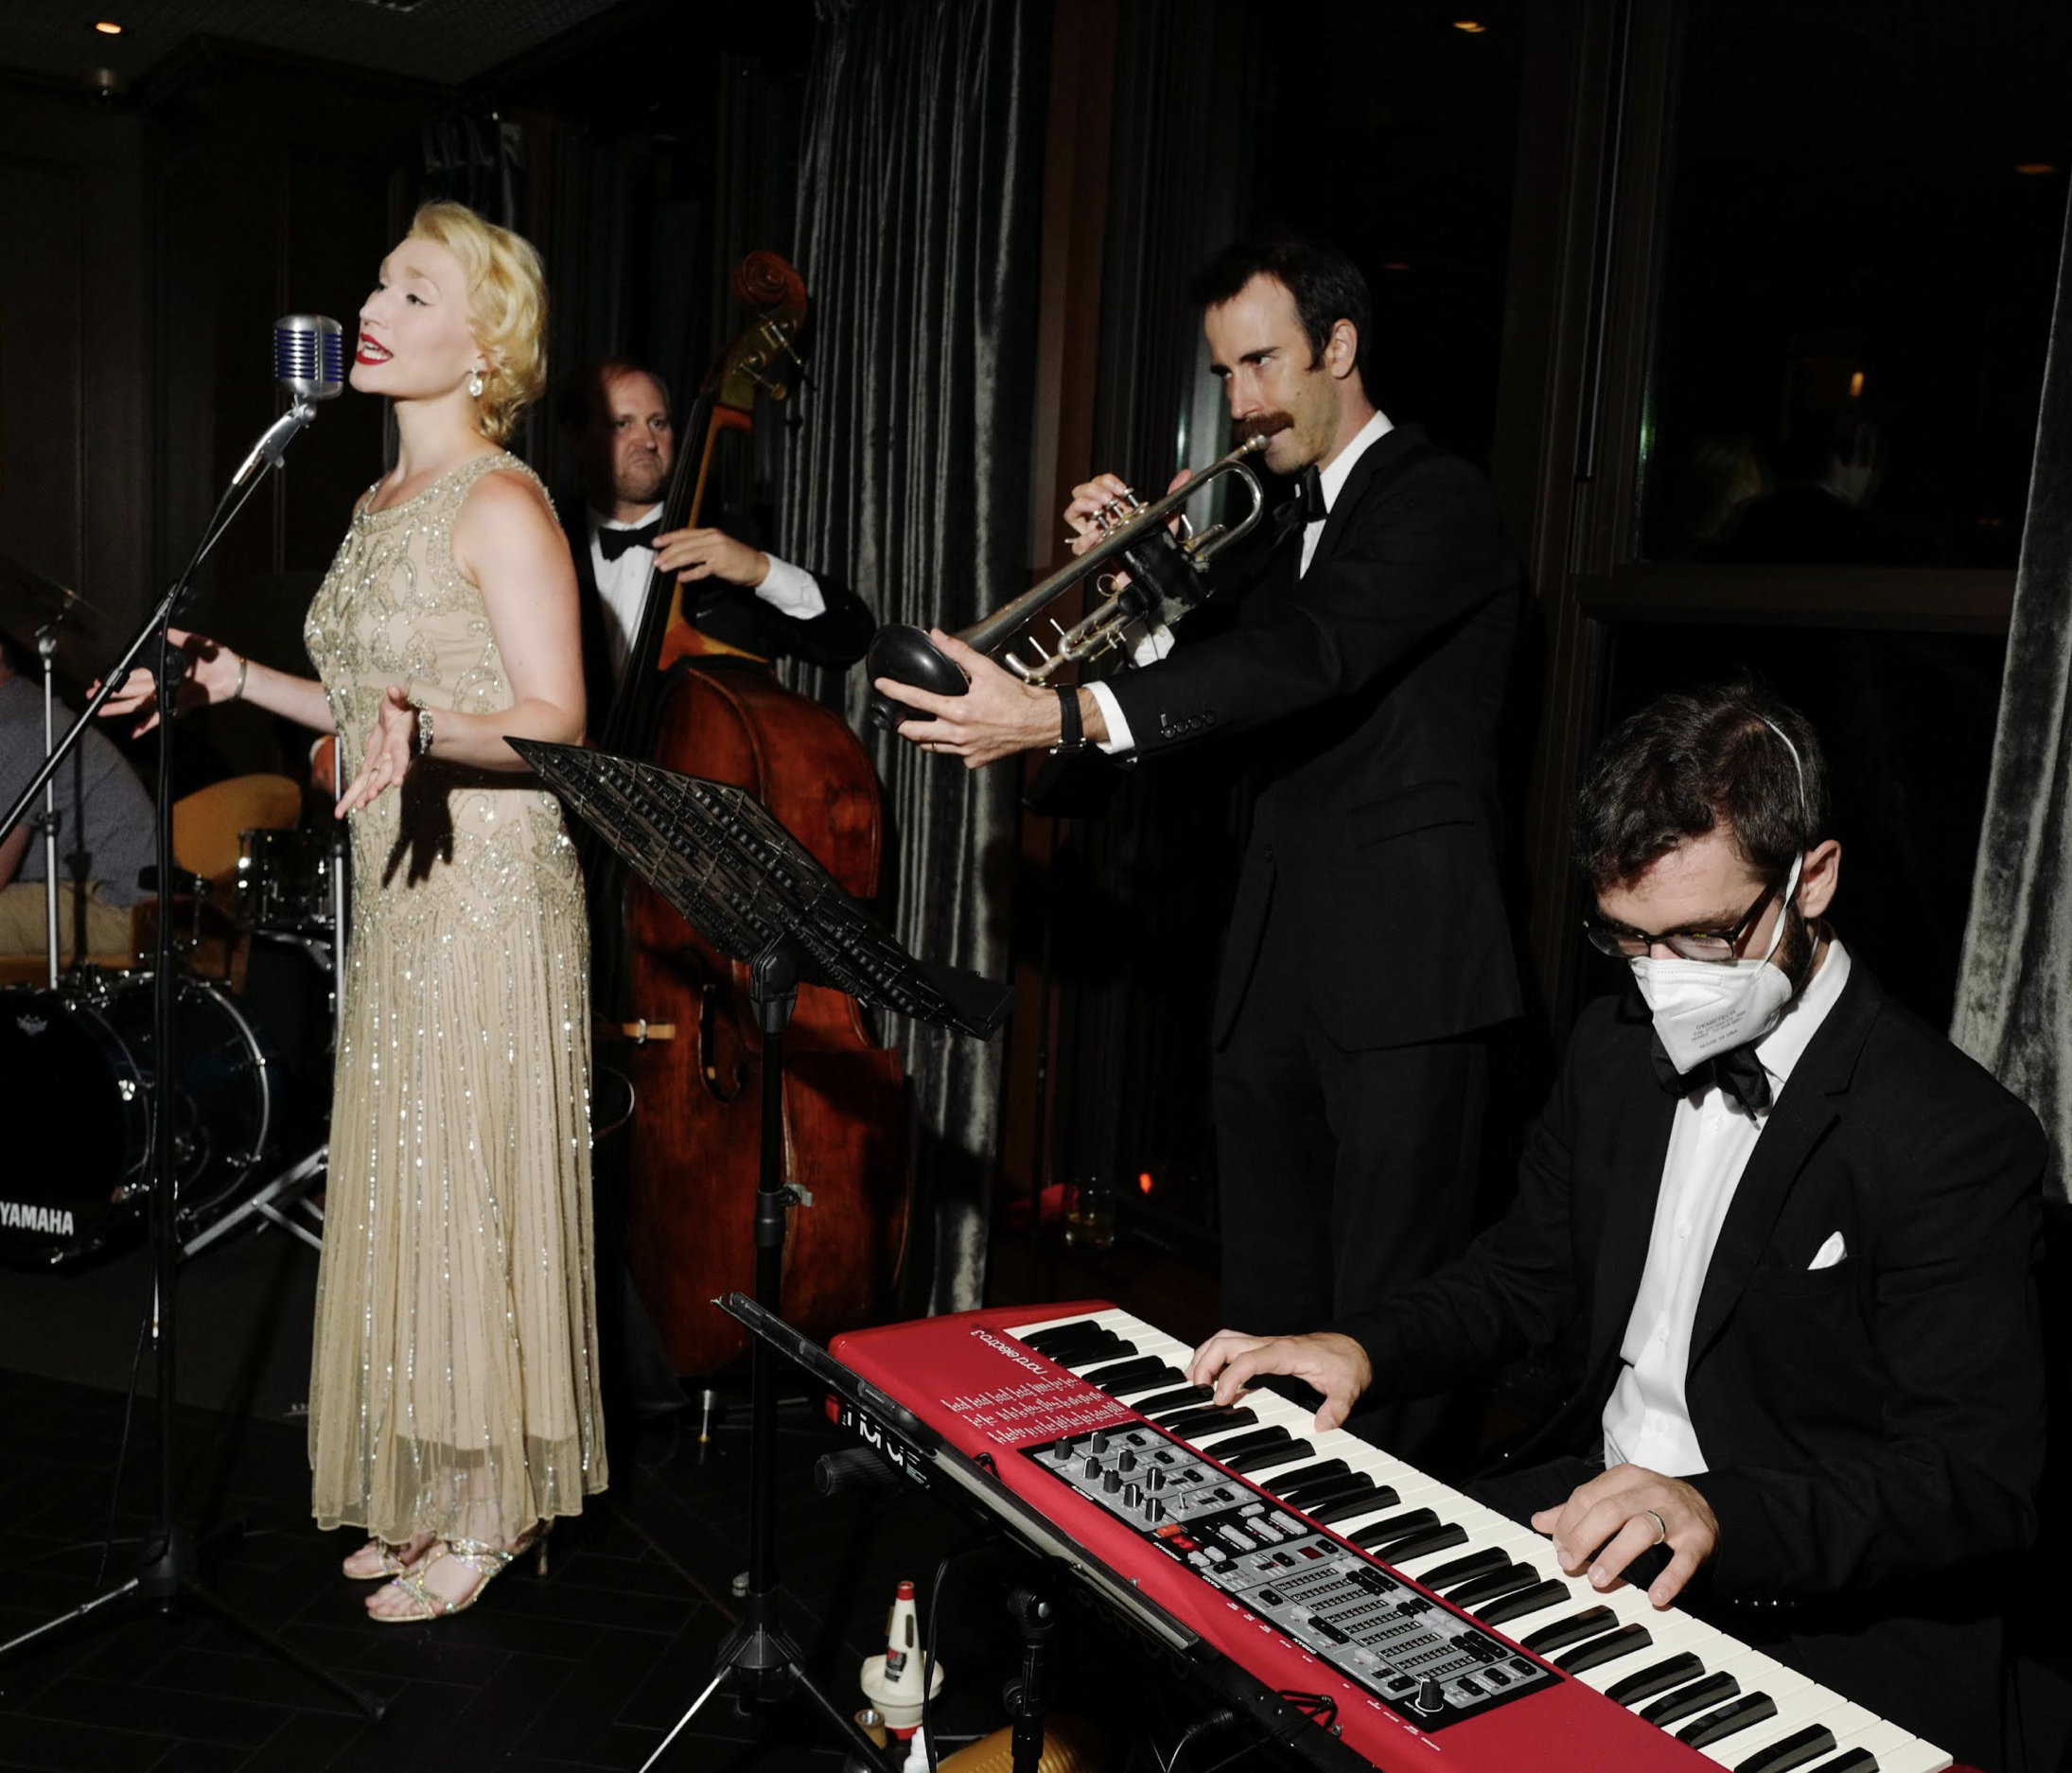 An image of a jazz quarter performing, including a woman singing, man playing piano, another man playing trumpet, and a third man playing a string instrument.